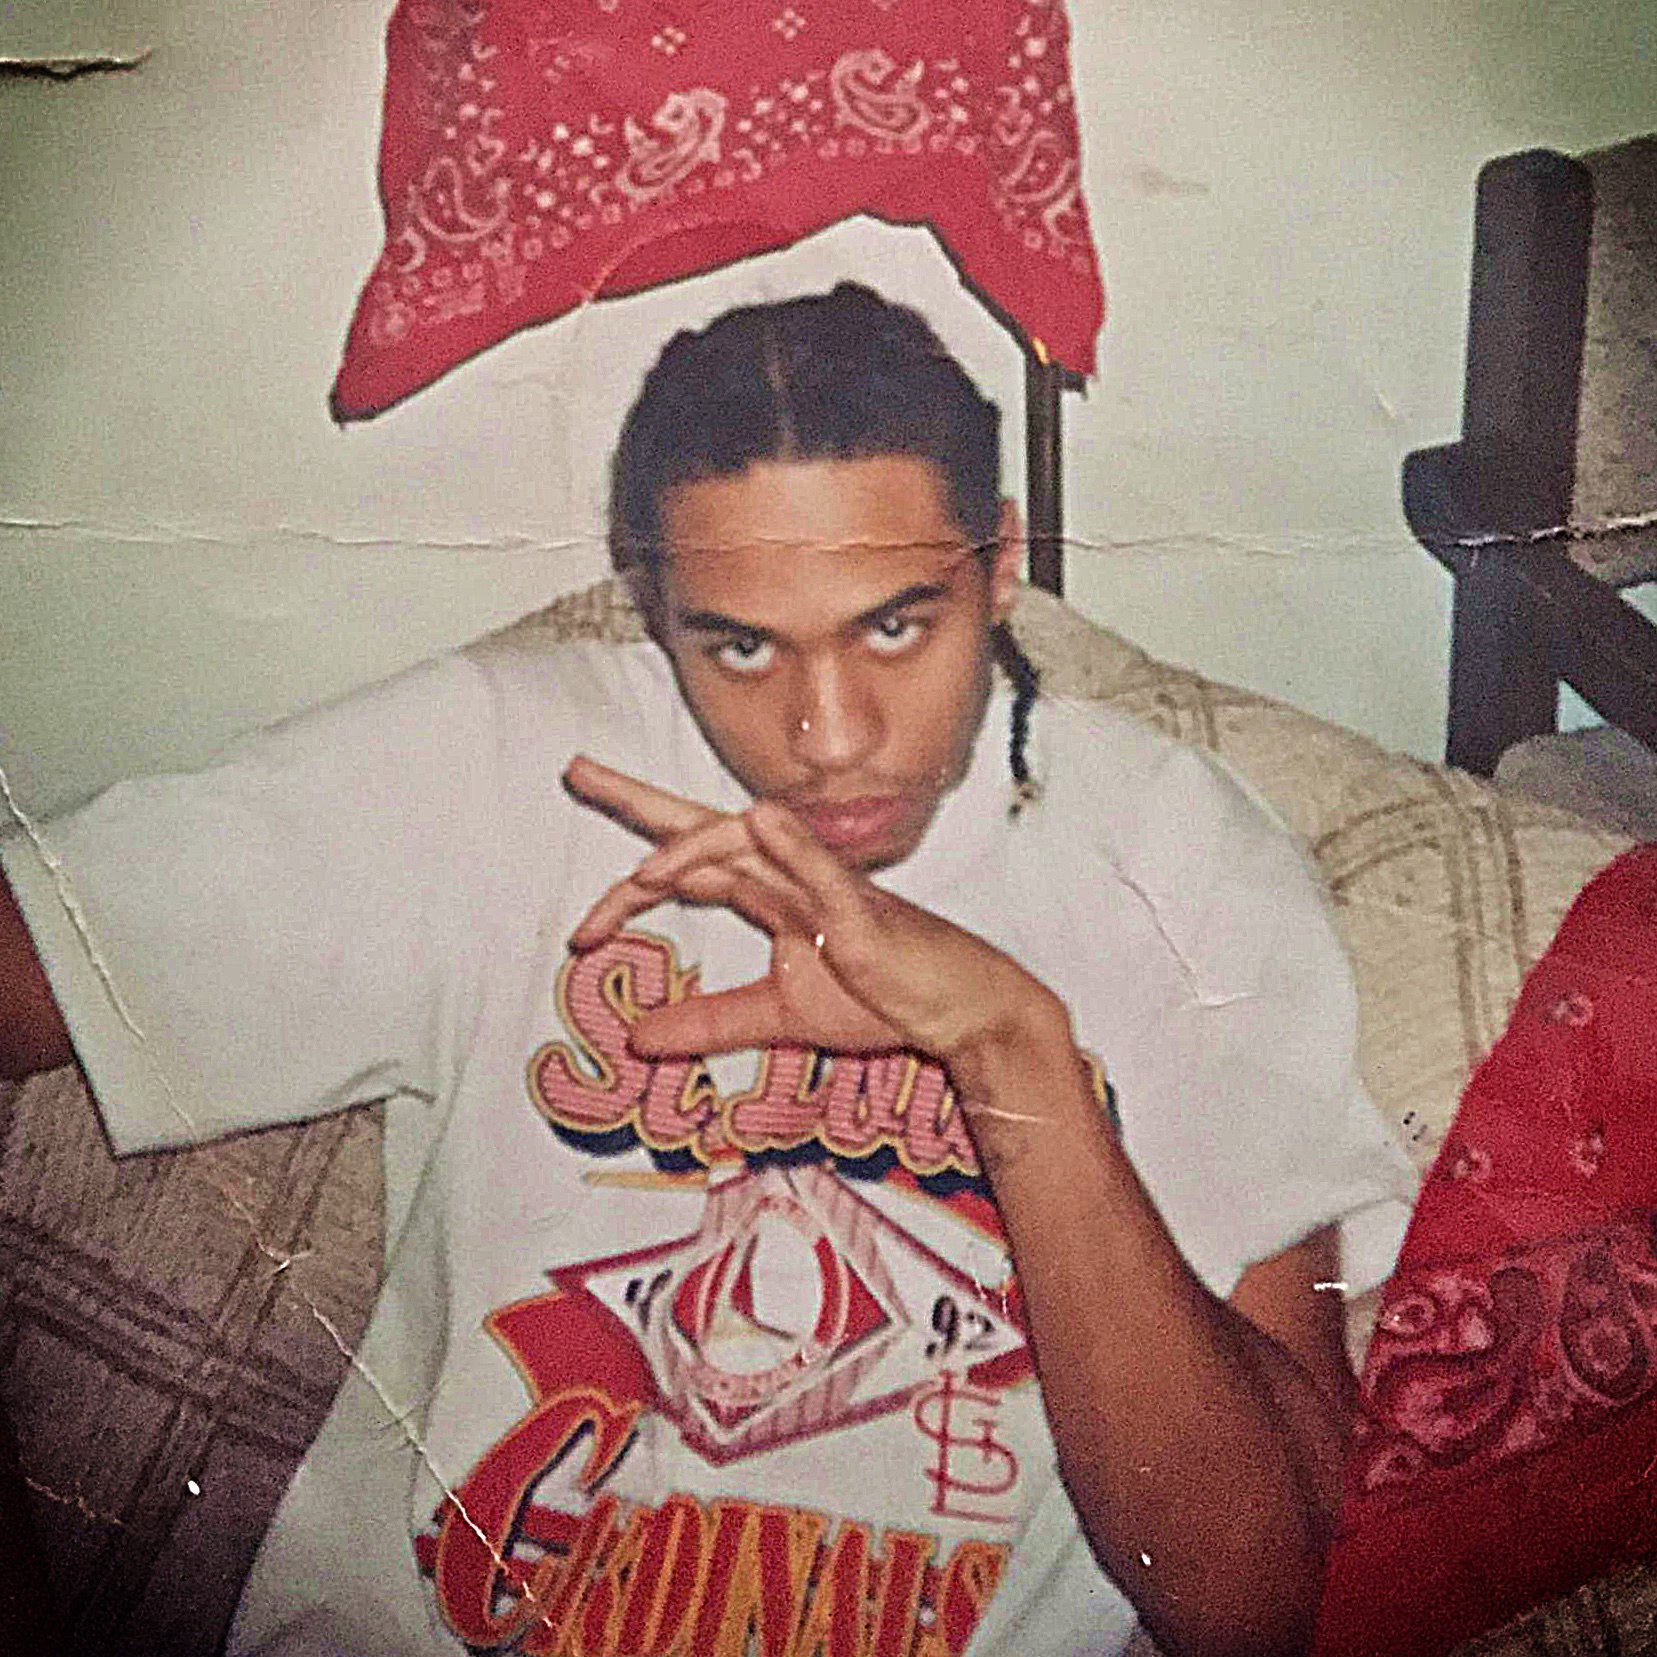 Photo of Terrance, age 17, soon after being “put on” the hood as an official Blood, flashing gang signs, circa 1993.